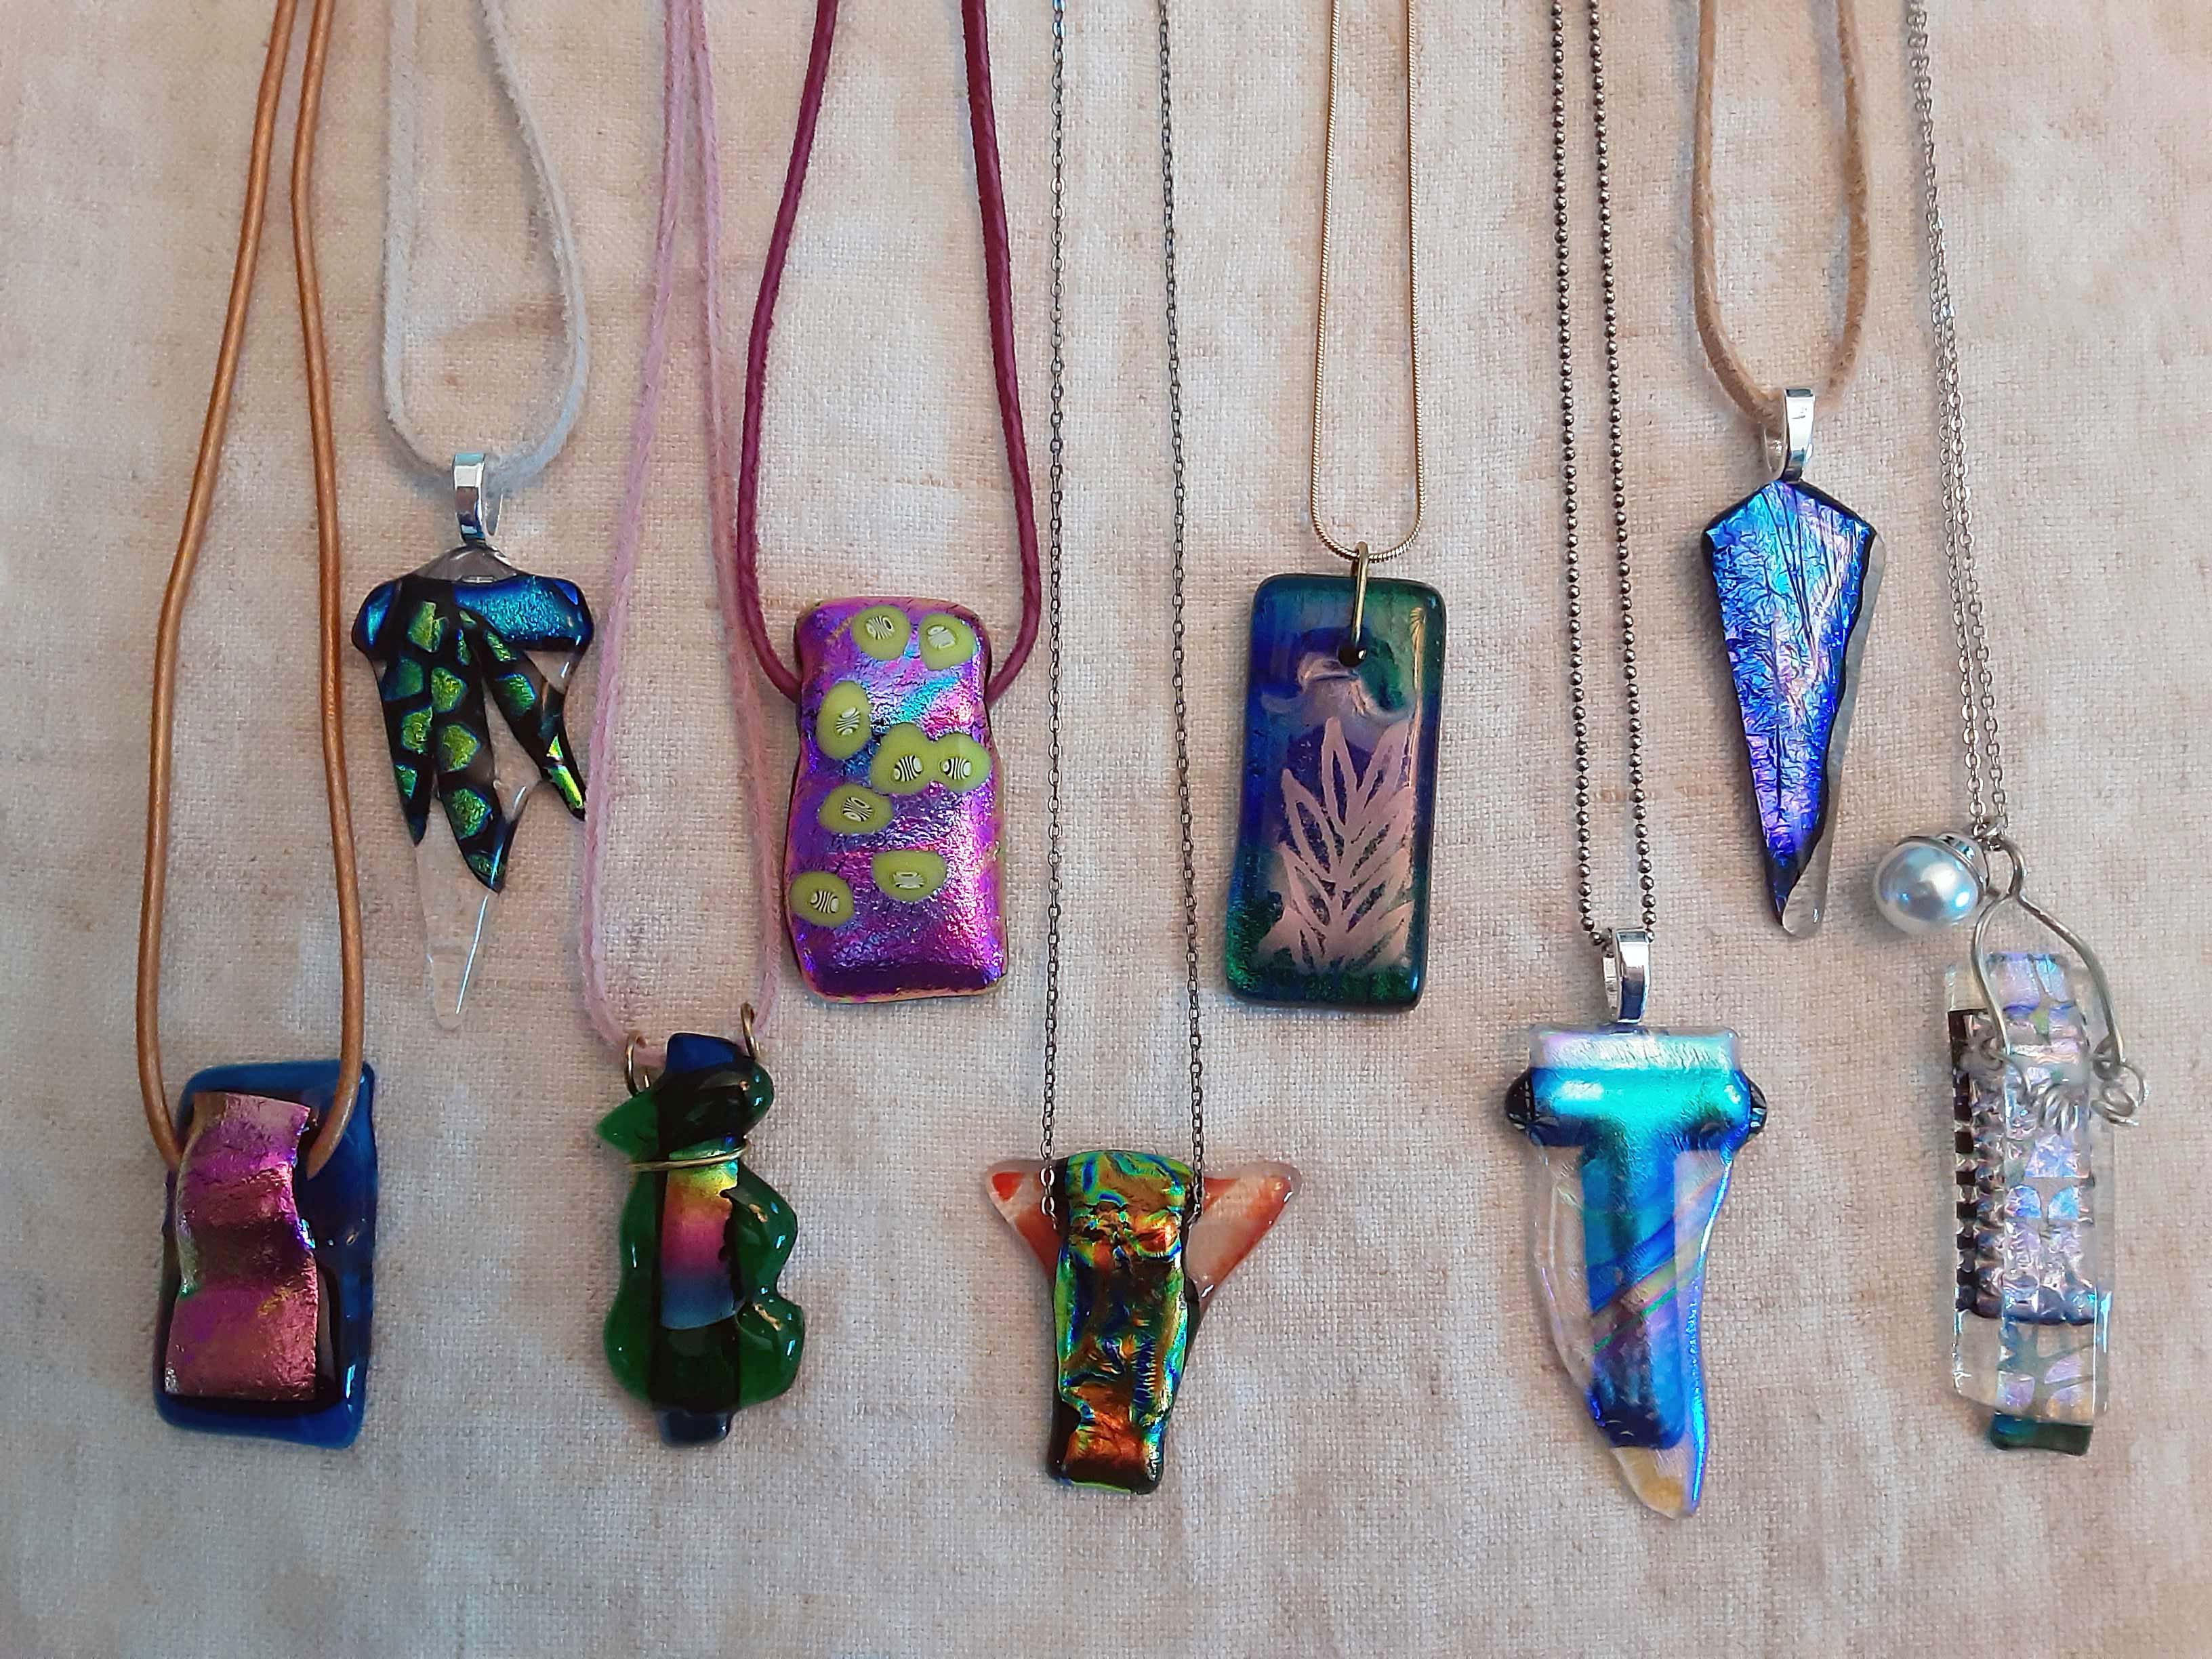 New Necklaces